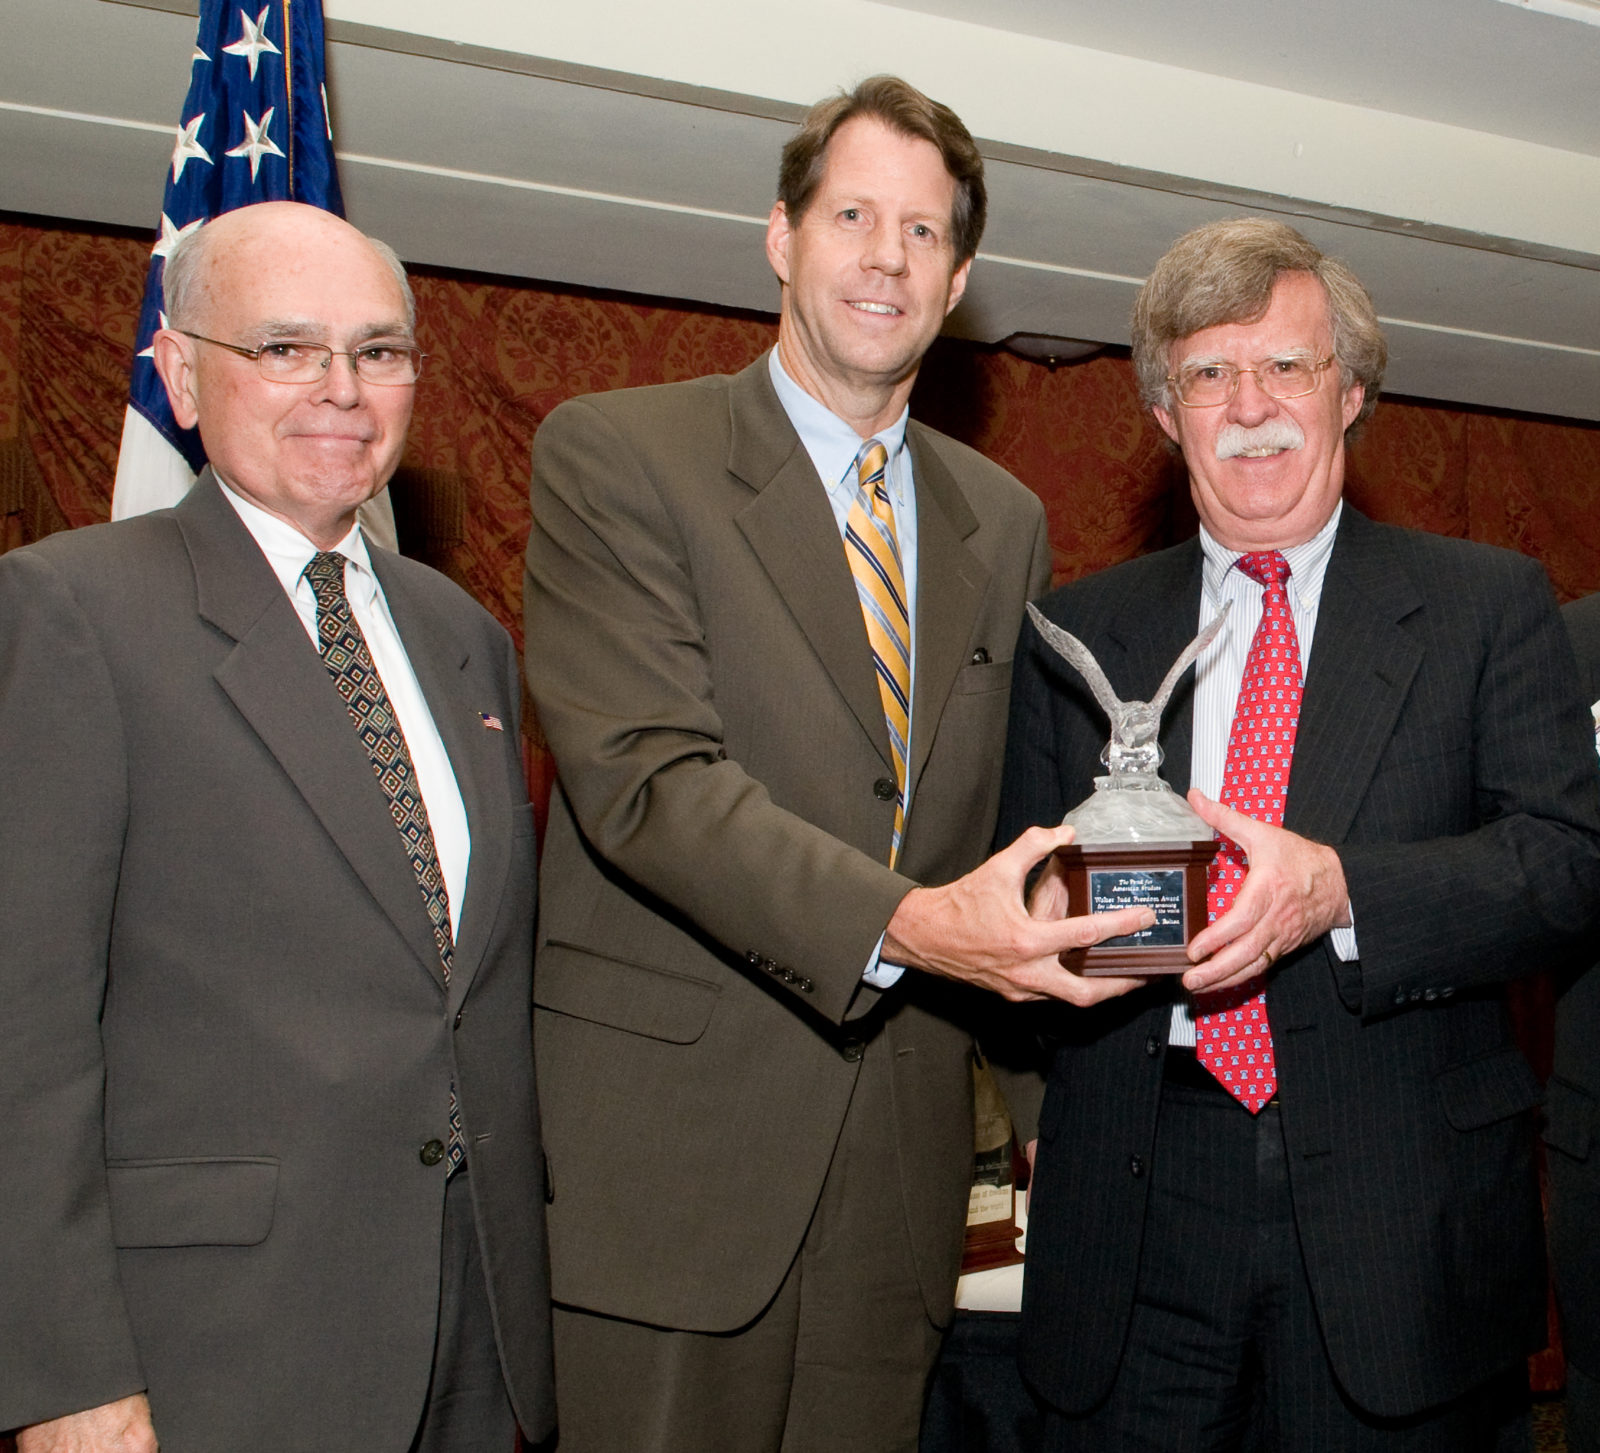 (r.) Former U.S. Ambassador to the United Nations John Bolton was given the 2009 Walter Judd Freedom Award on July 23. He is pictured here with (l.-r.) 2008 recipient Dr. Lee Edwards and TFAS President Roger Ream.